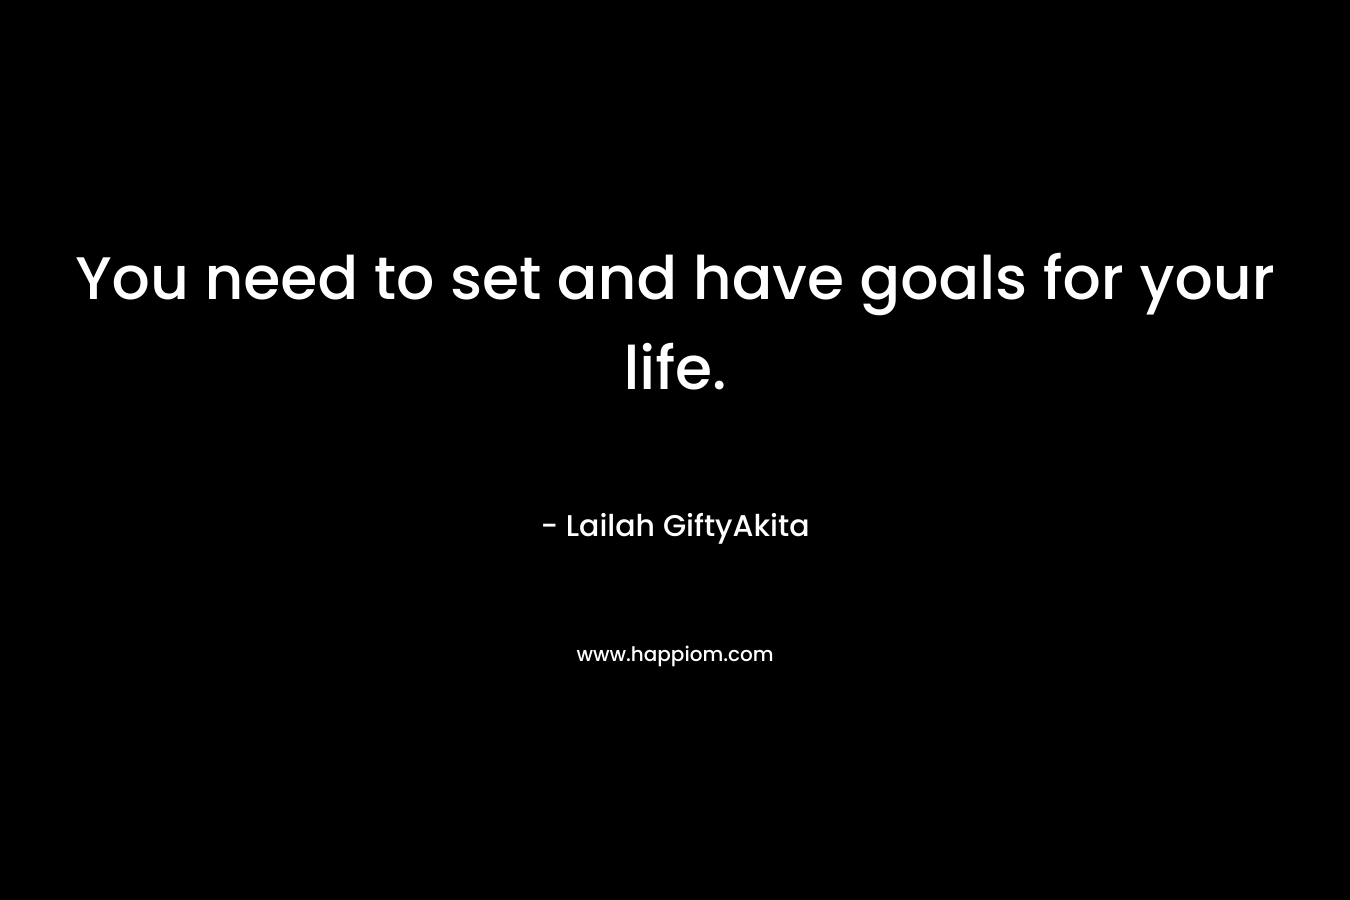 You need to set and have goals for your life.